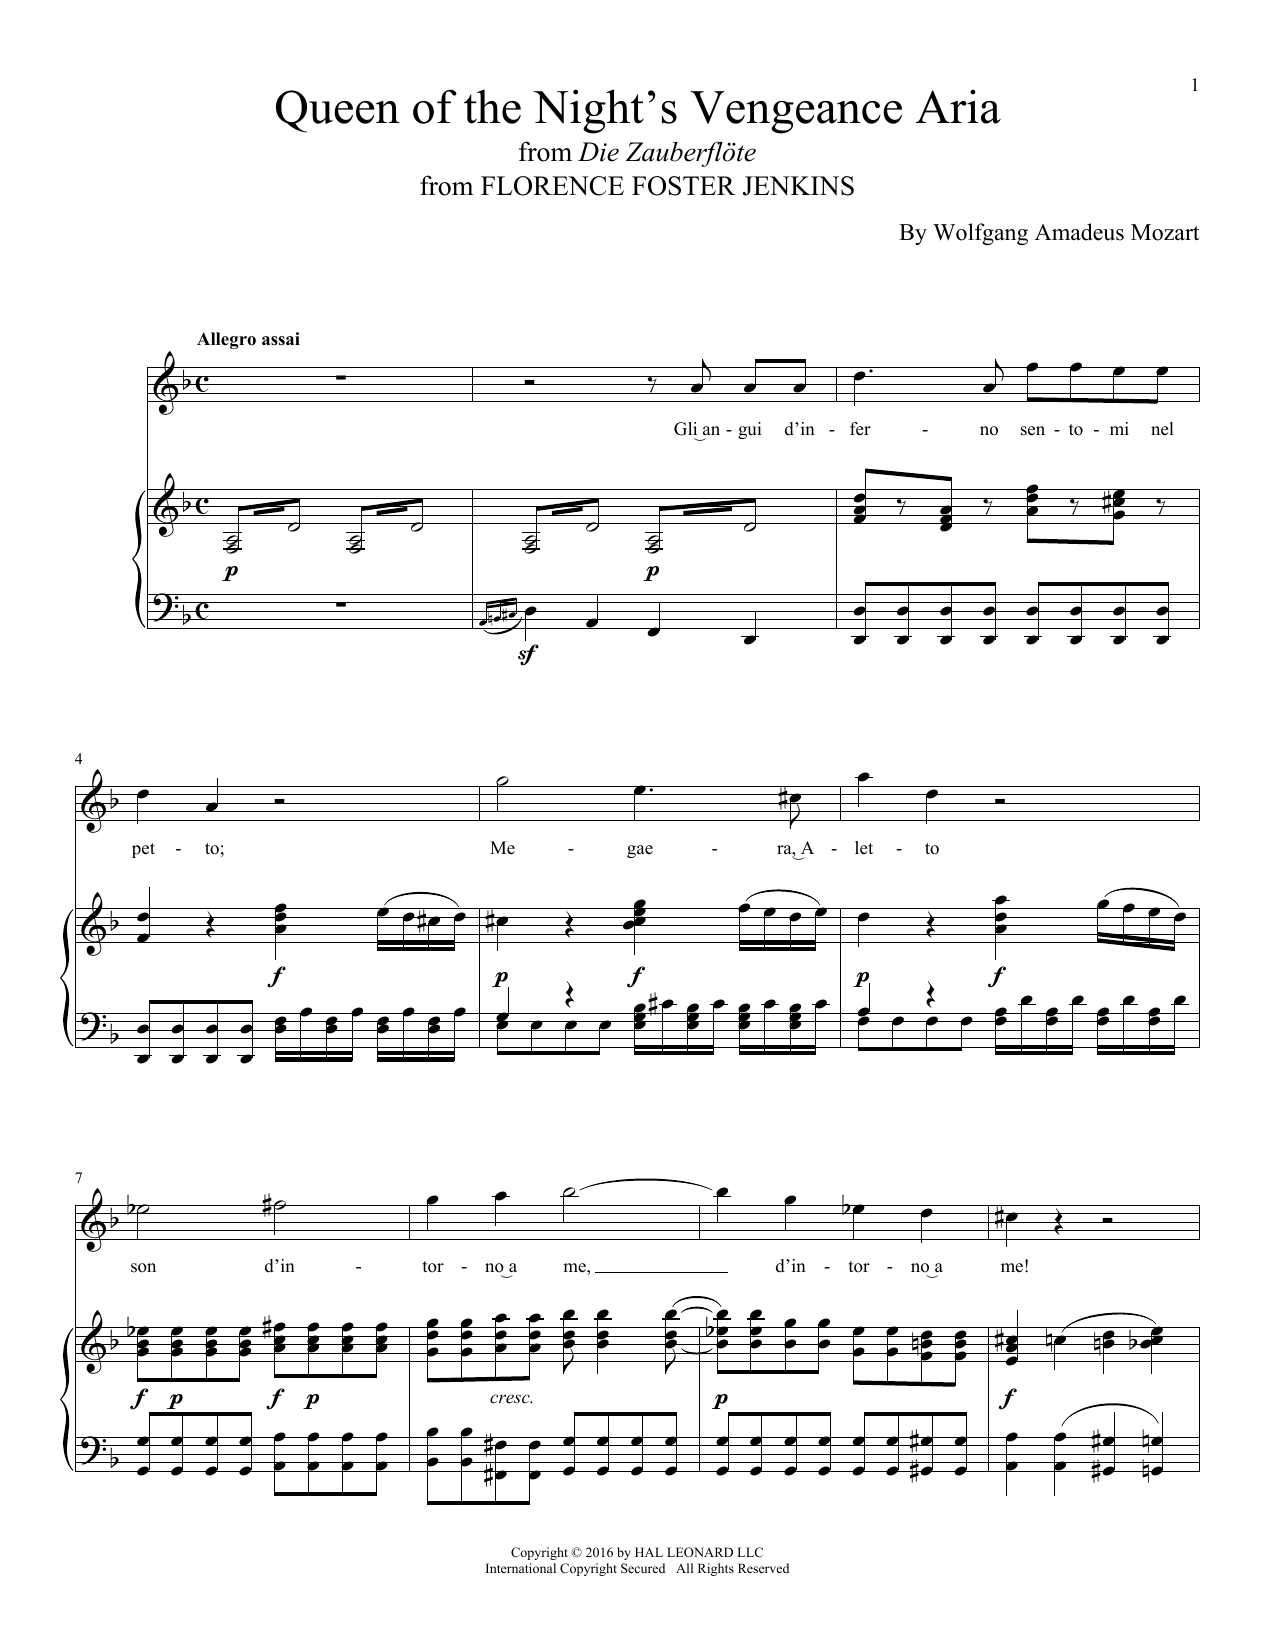 Wolfgang Amadeus Mozart Queen Of The Night's Vengeance Aria sheet music notes printable PDF score